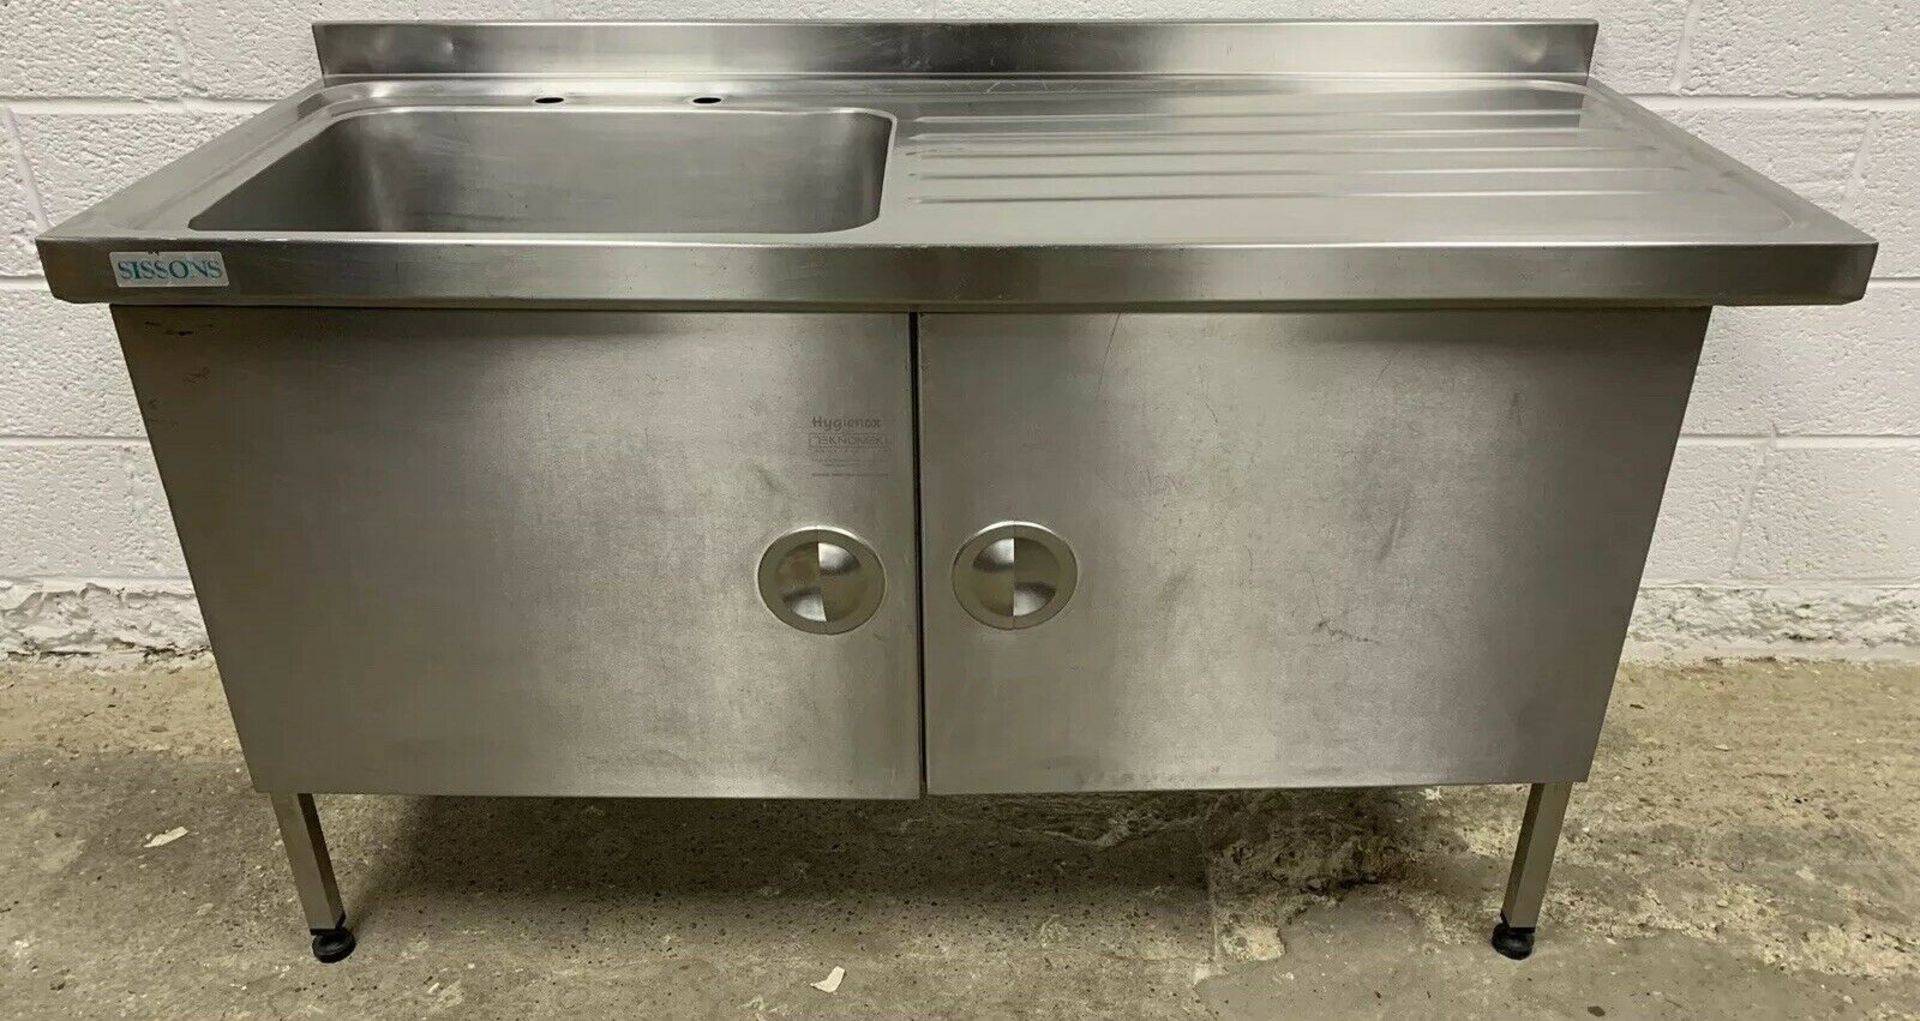 Sissons Stainless Steel Single Bowl Sink With Righthand Drainer And Cupboard Unit - Image 4 of 5